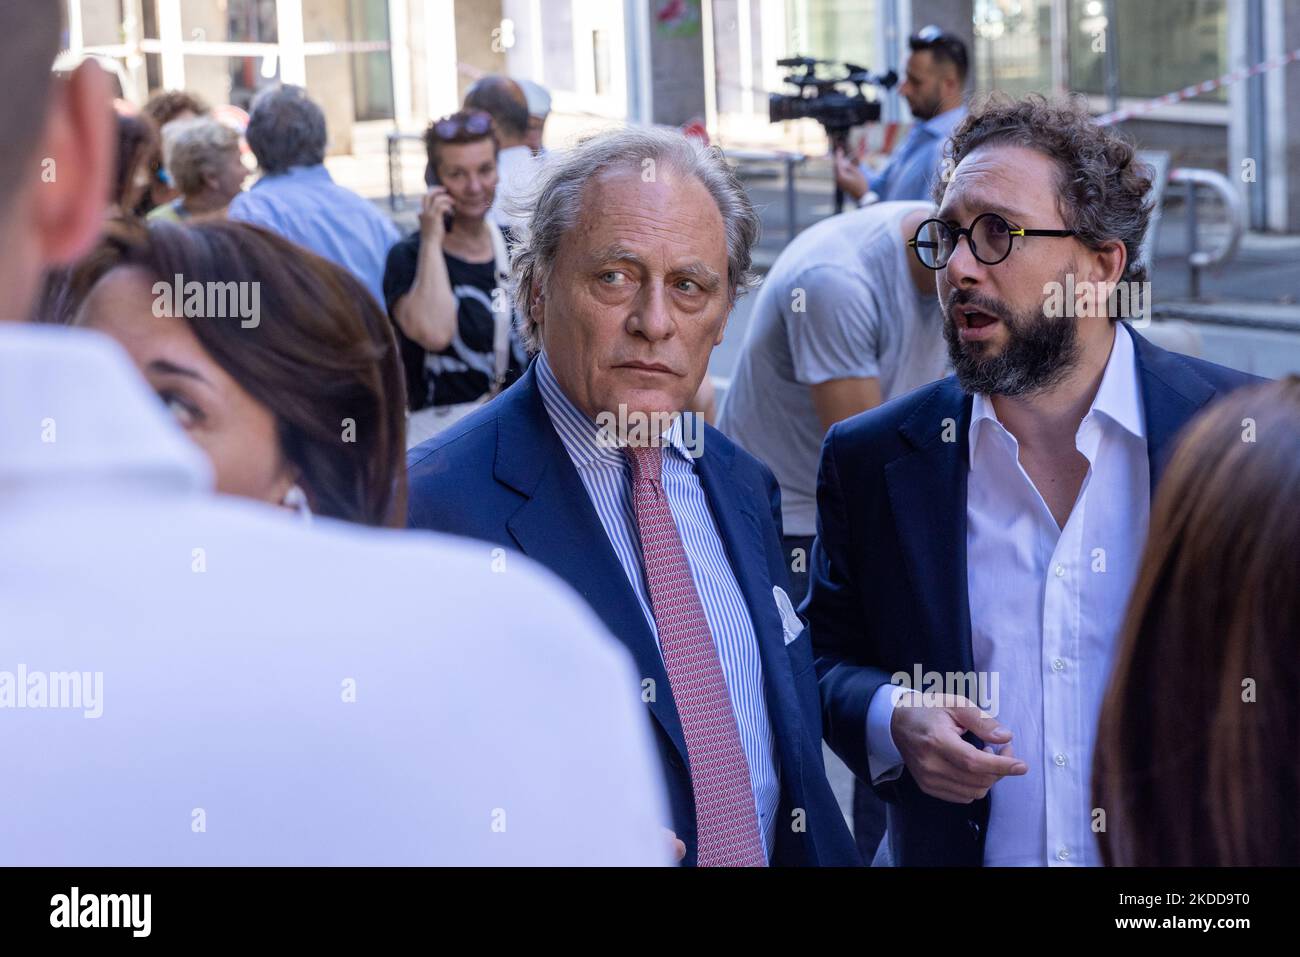 Guido Carlo Alleva, lawyer of former CEO of Atlantia Giovanni Castellucci, talks to journalists outside the Genoa's Palace of Justice. The former CEO of Atlantia Giovanni Castellucci (not present today) will be tried, along with 58 others, for the collapse of Genoa's Morandi bridge where forty-three people died on August 14, 2018, after a storm. The relatives of the victims will be able to see the proceedings outside the court on the screen in the conference hall of Genoa court. (Photo by Mauro Ujetto/NurPhoto) Stock Photo